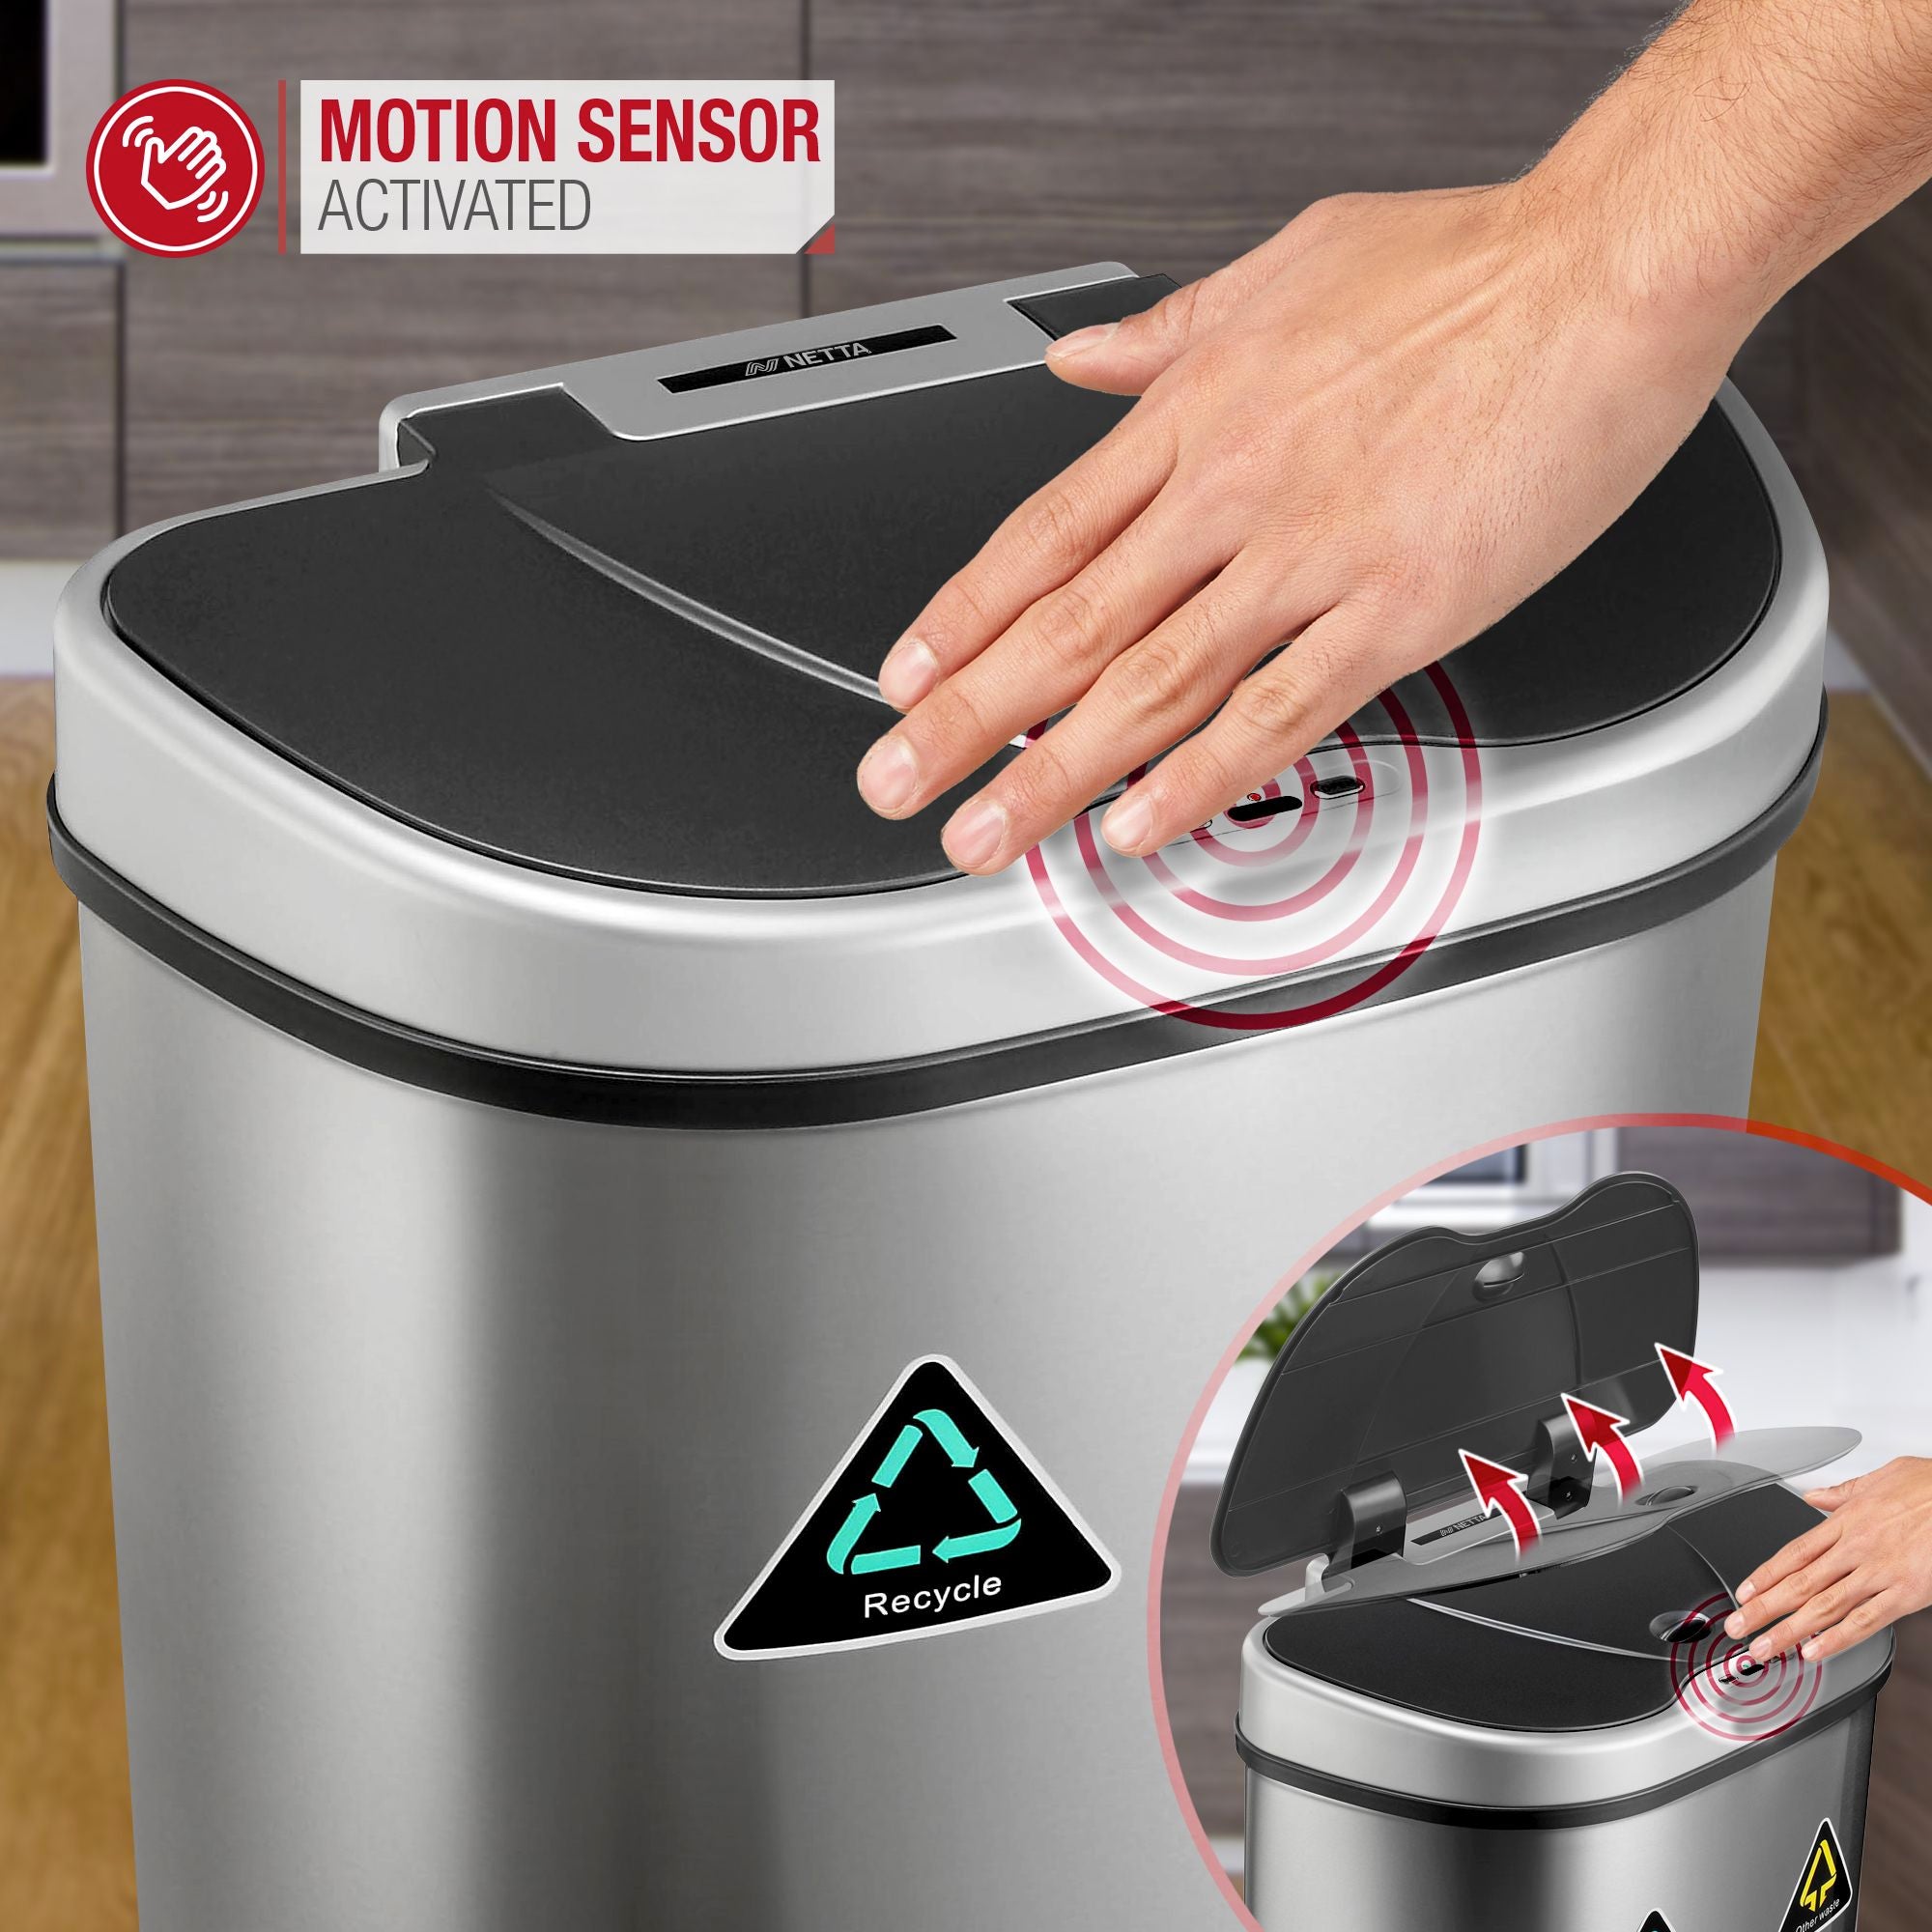 NETTA Sensor Bin with Dual Compartment - Stainless Steel - 70L